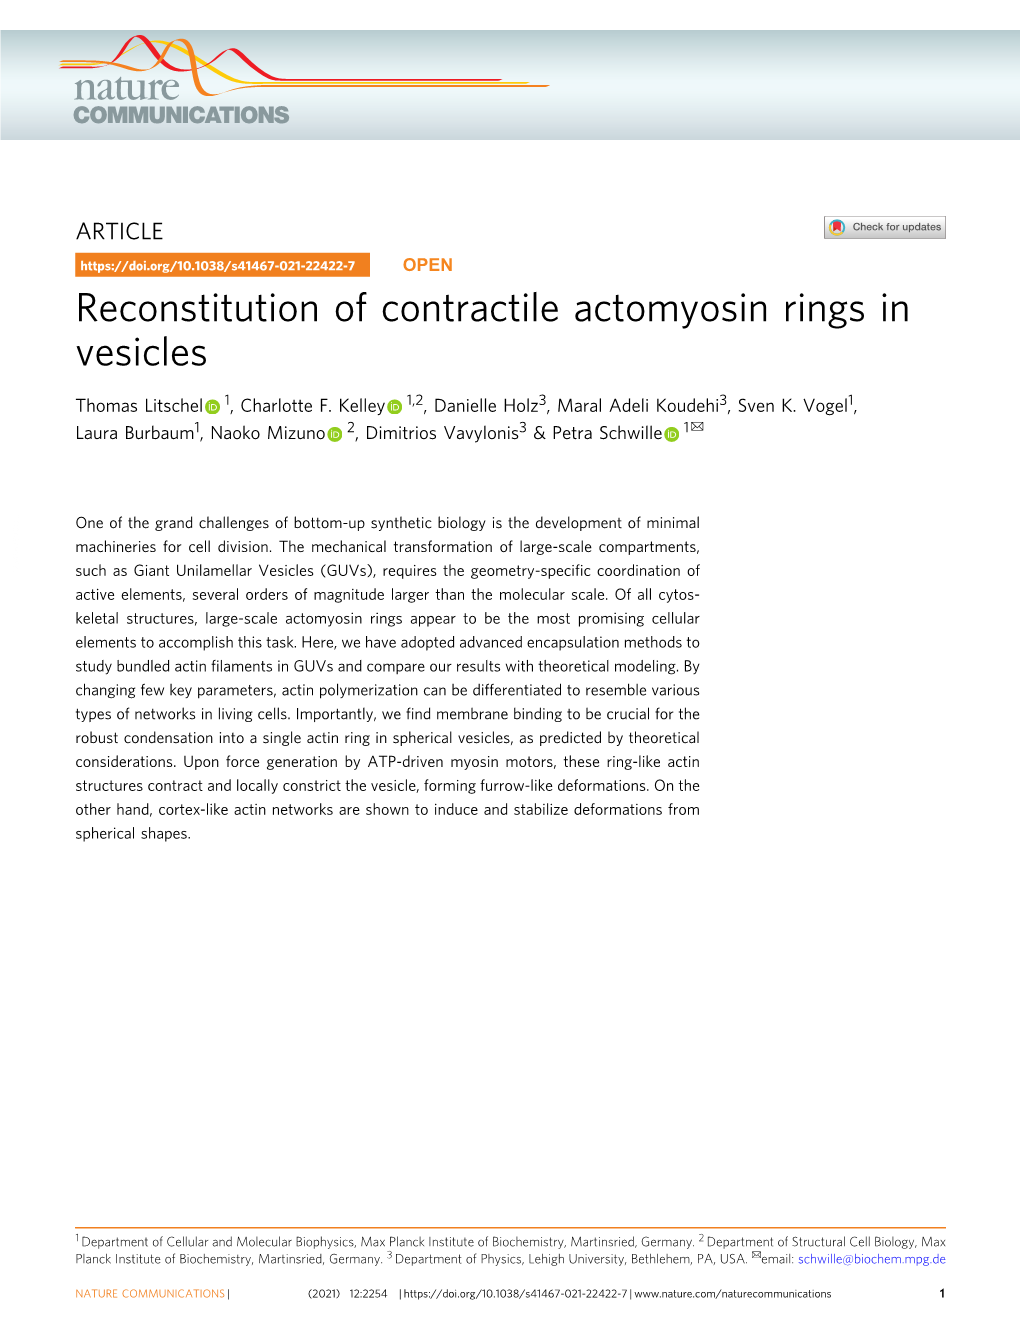 Reconstitution of Contractile Actomyosin Rings in Vesicles